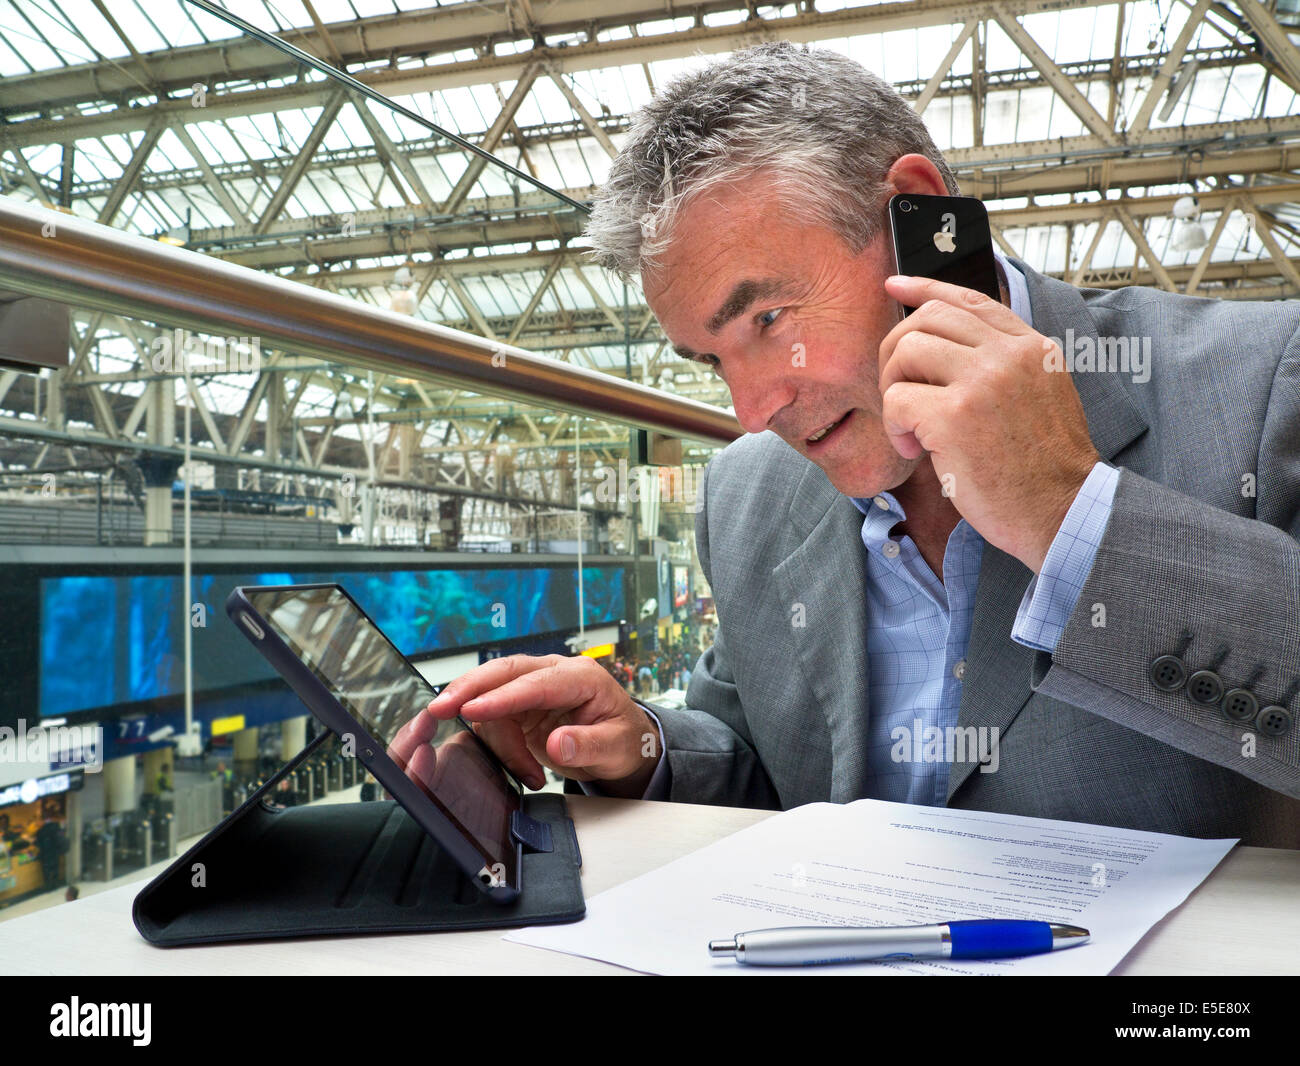 Busy mature businessman seated at cafe table on railway concourse looking at his tablet computer screen and using his iPhone Stock Photo